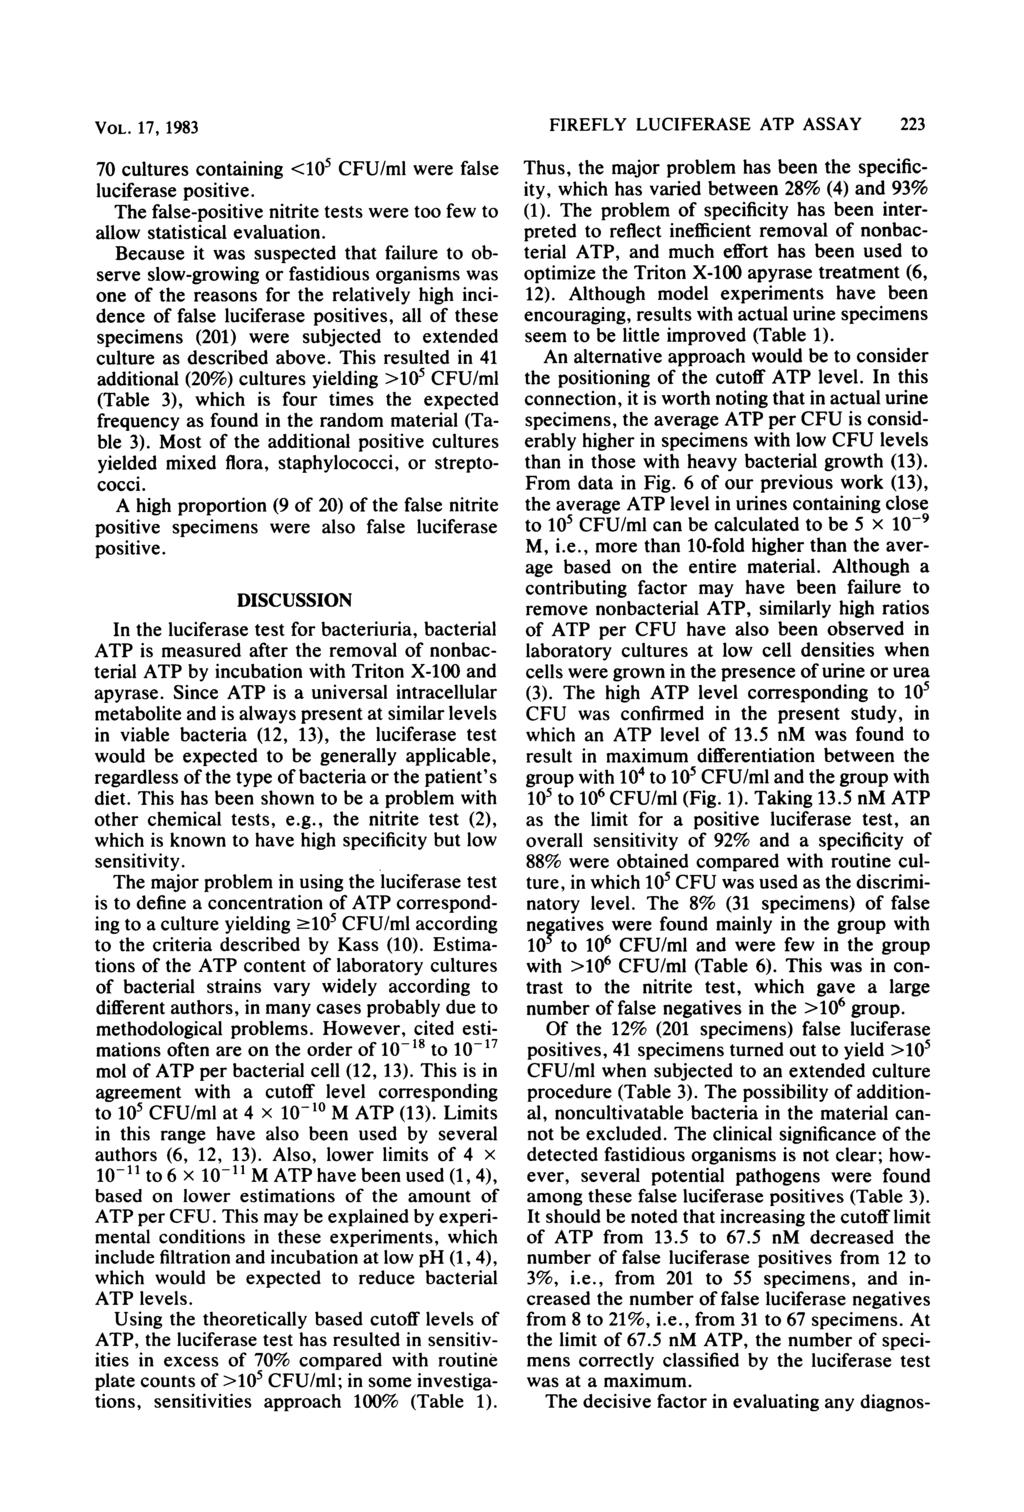 VOL. 17, 1983 70 cultures containing <105 CFU/ml were false luciferase positive. The false-positive nitrite tests were too few to allow statistical evaluation.